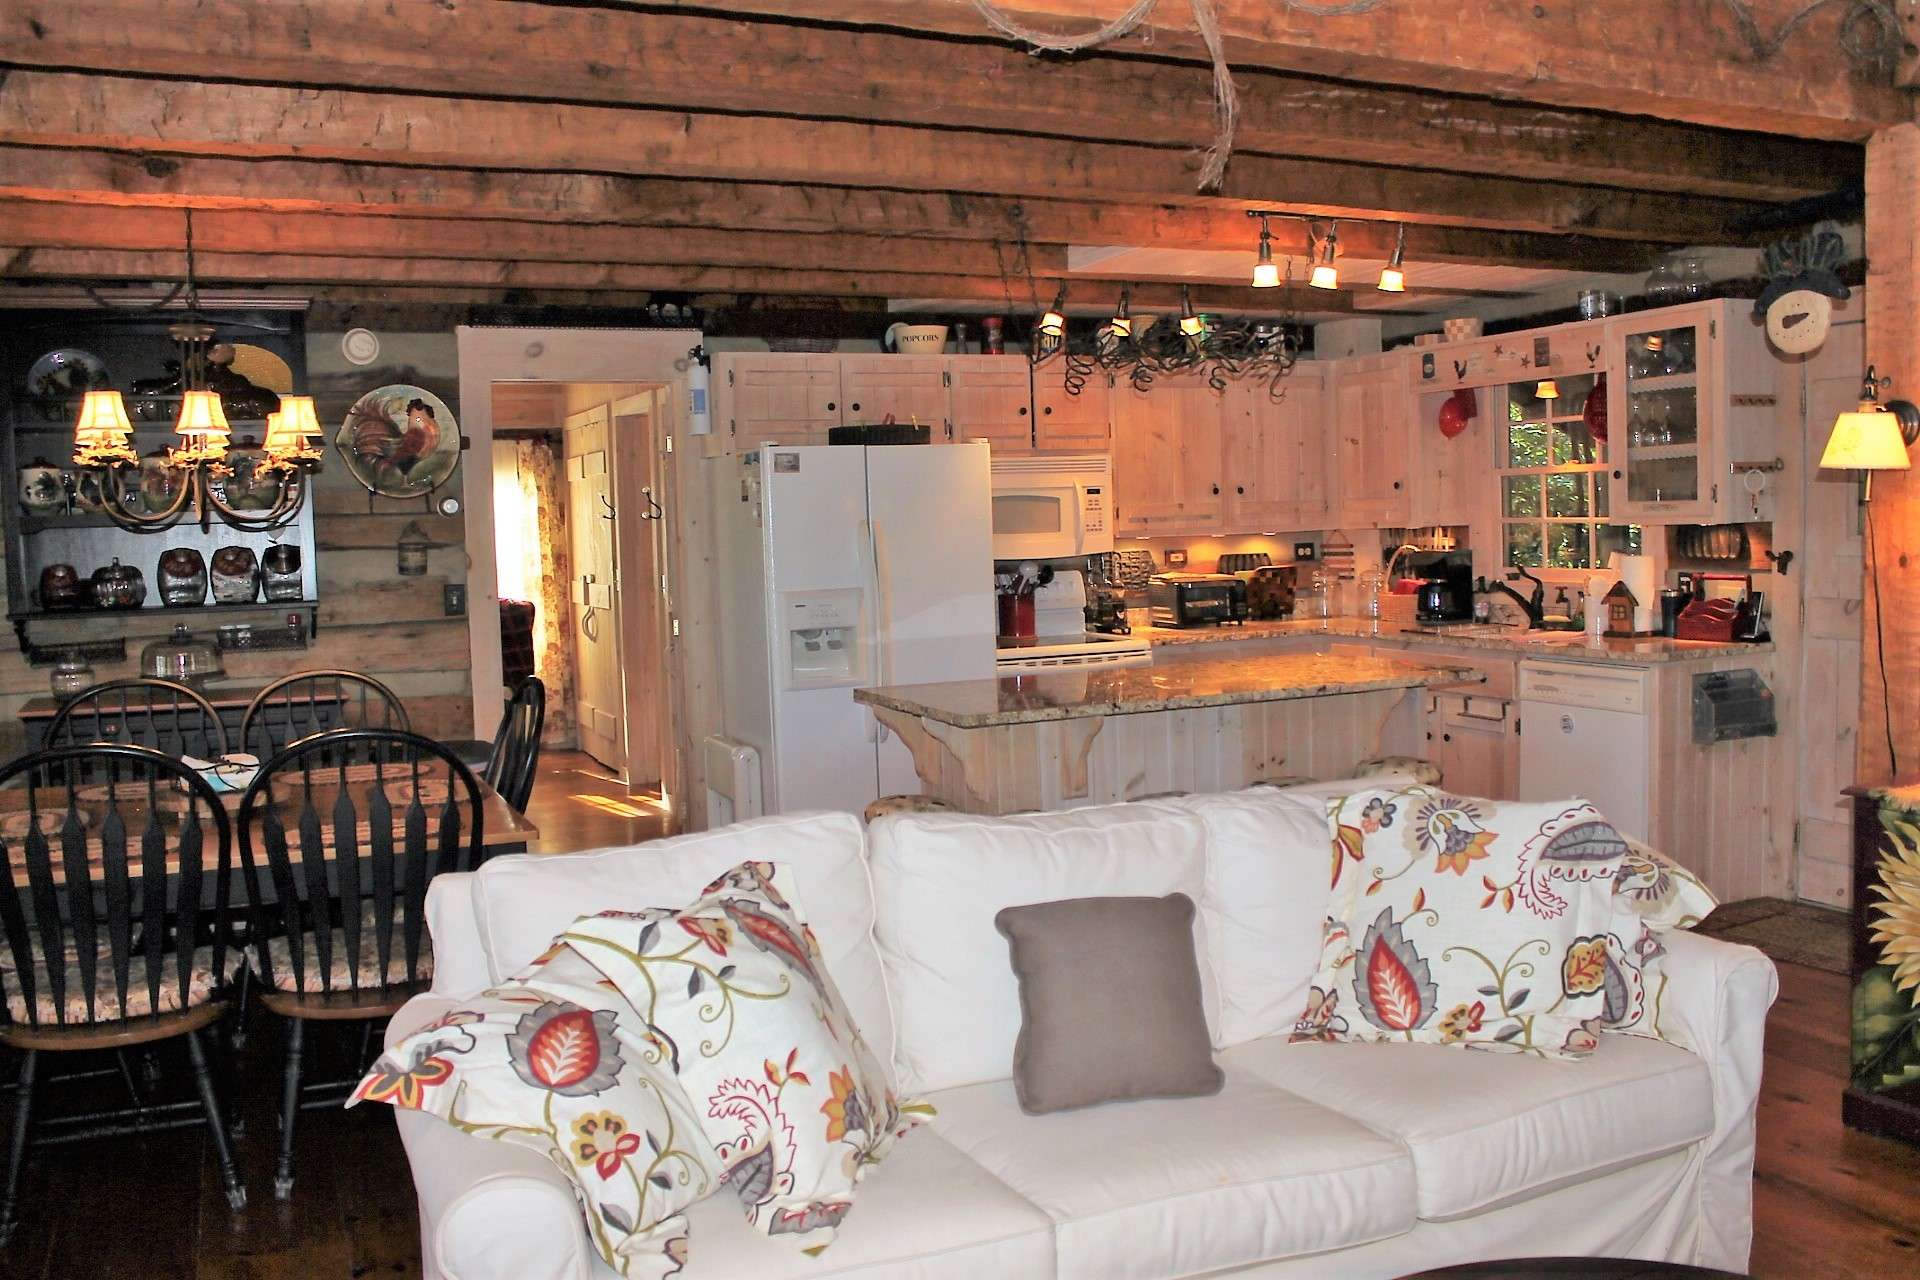 Beamed ceilings bring a rustic touch while white washed accents keep it light.